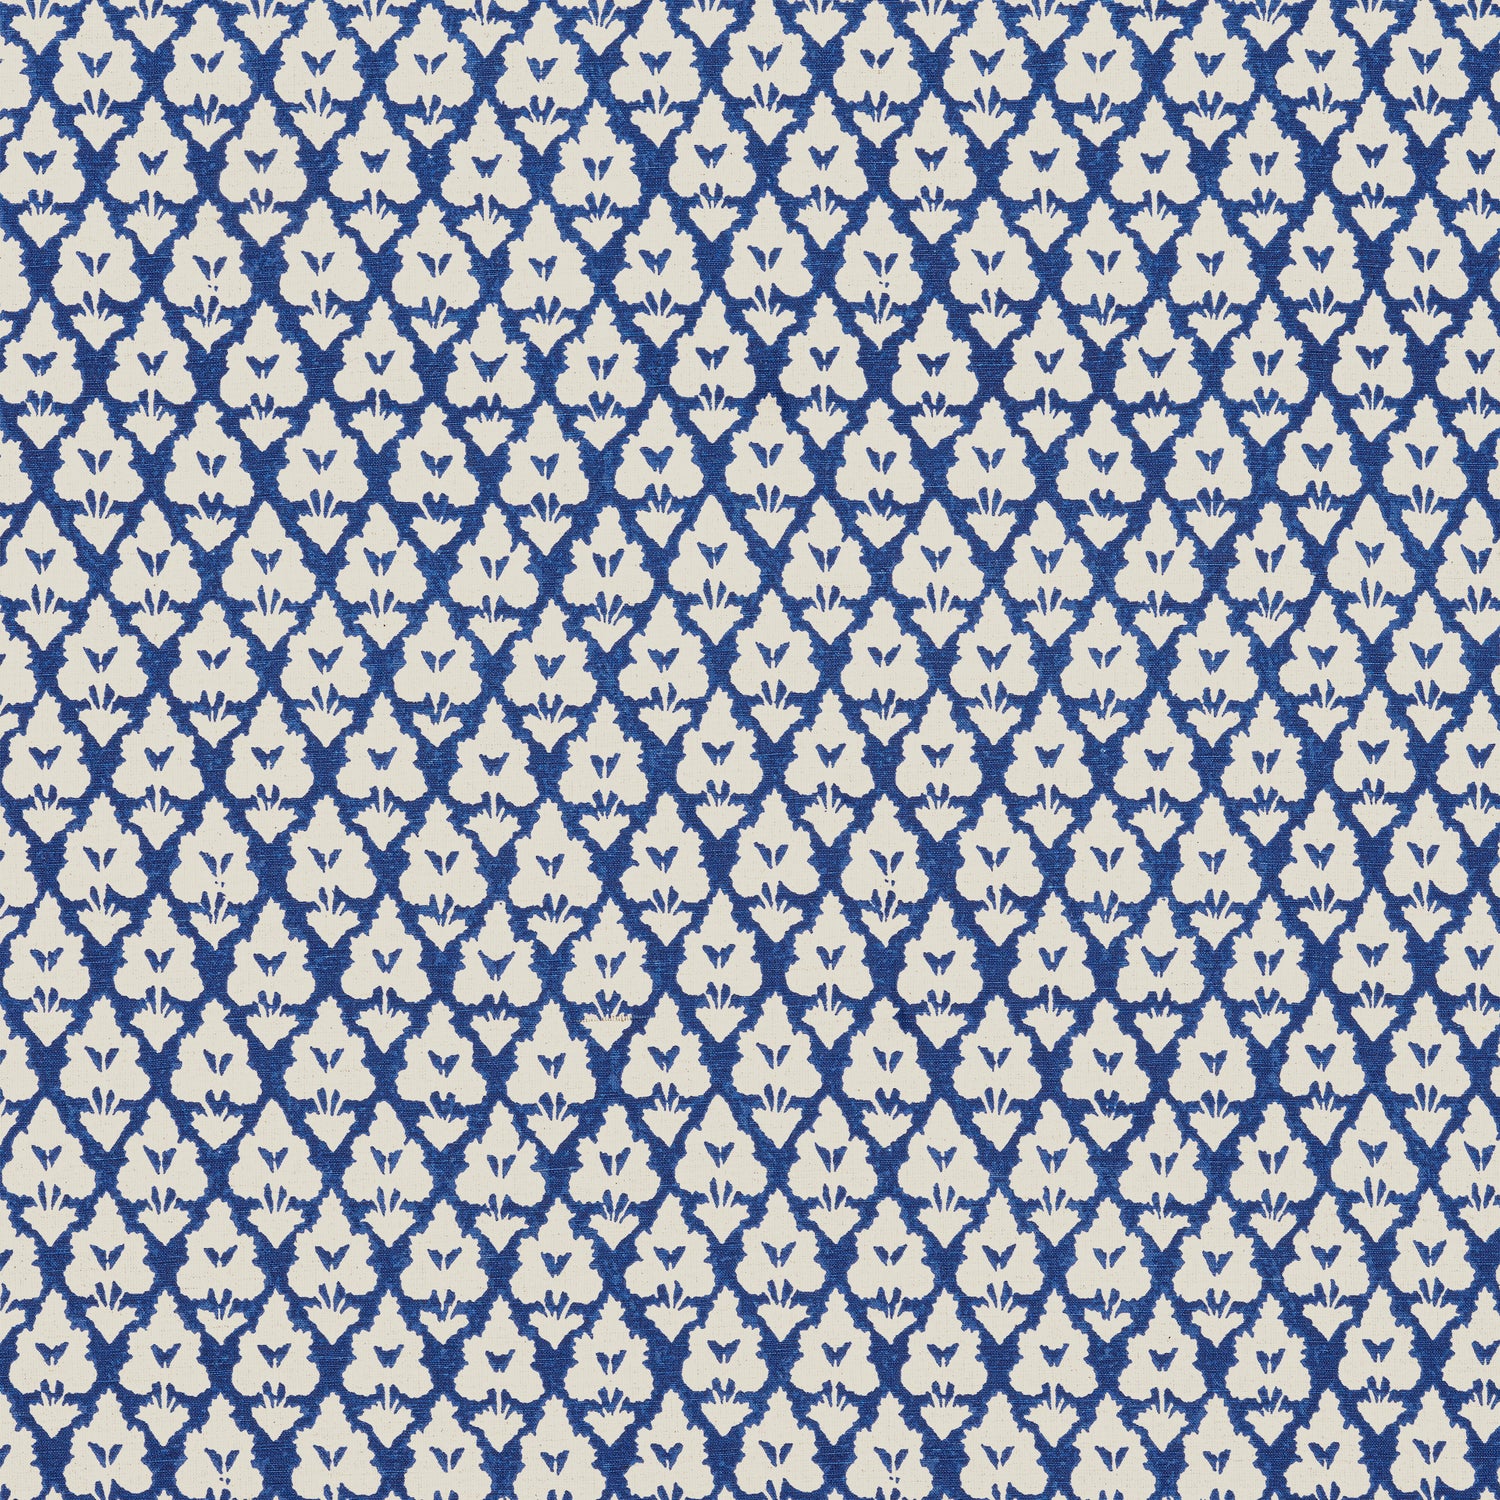 Arboreta fabric in navy color - pattern number F910833 - by Thibaut in the Heritage collection